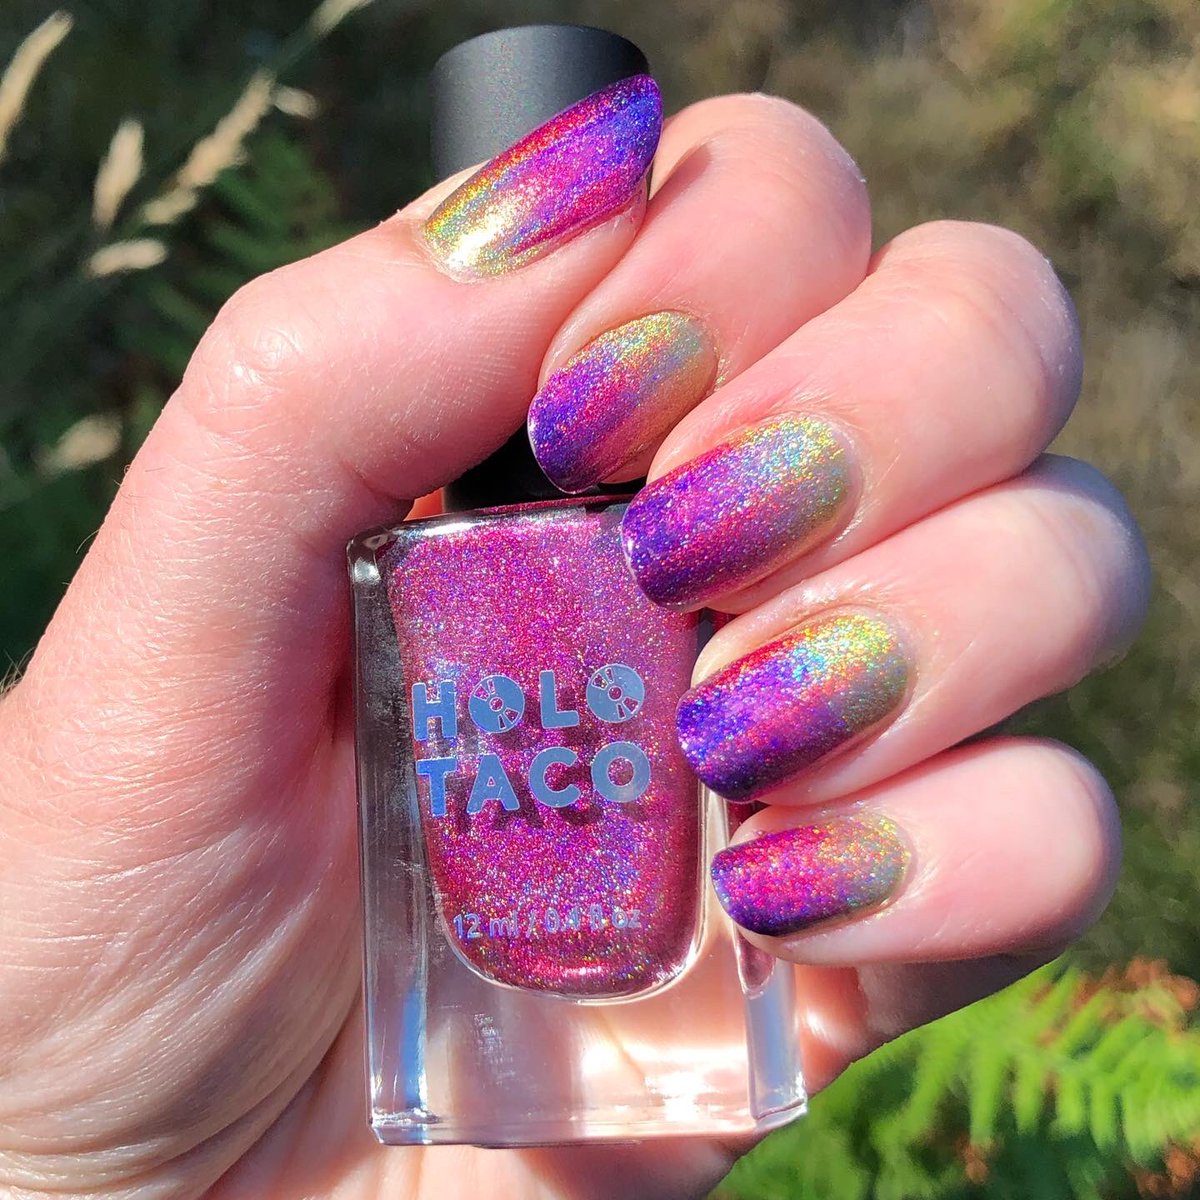 Linear Holo gradient! There’s at lease one polish from each Holo Taco linear holo collection! 
.
Holo Taco: Purple Slushie, Hot-Wire Pink, Coral Chaser, Lemon Spritzer
.
#nailpolish #holotaco #linearholopolish #gradientnails